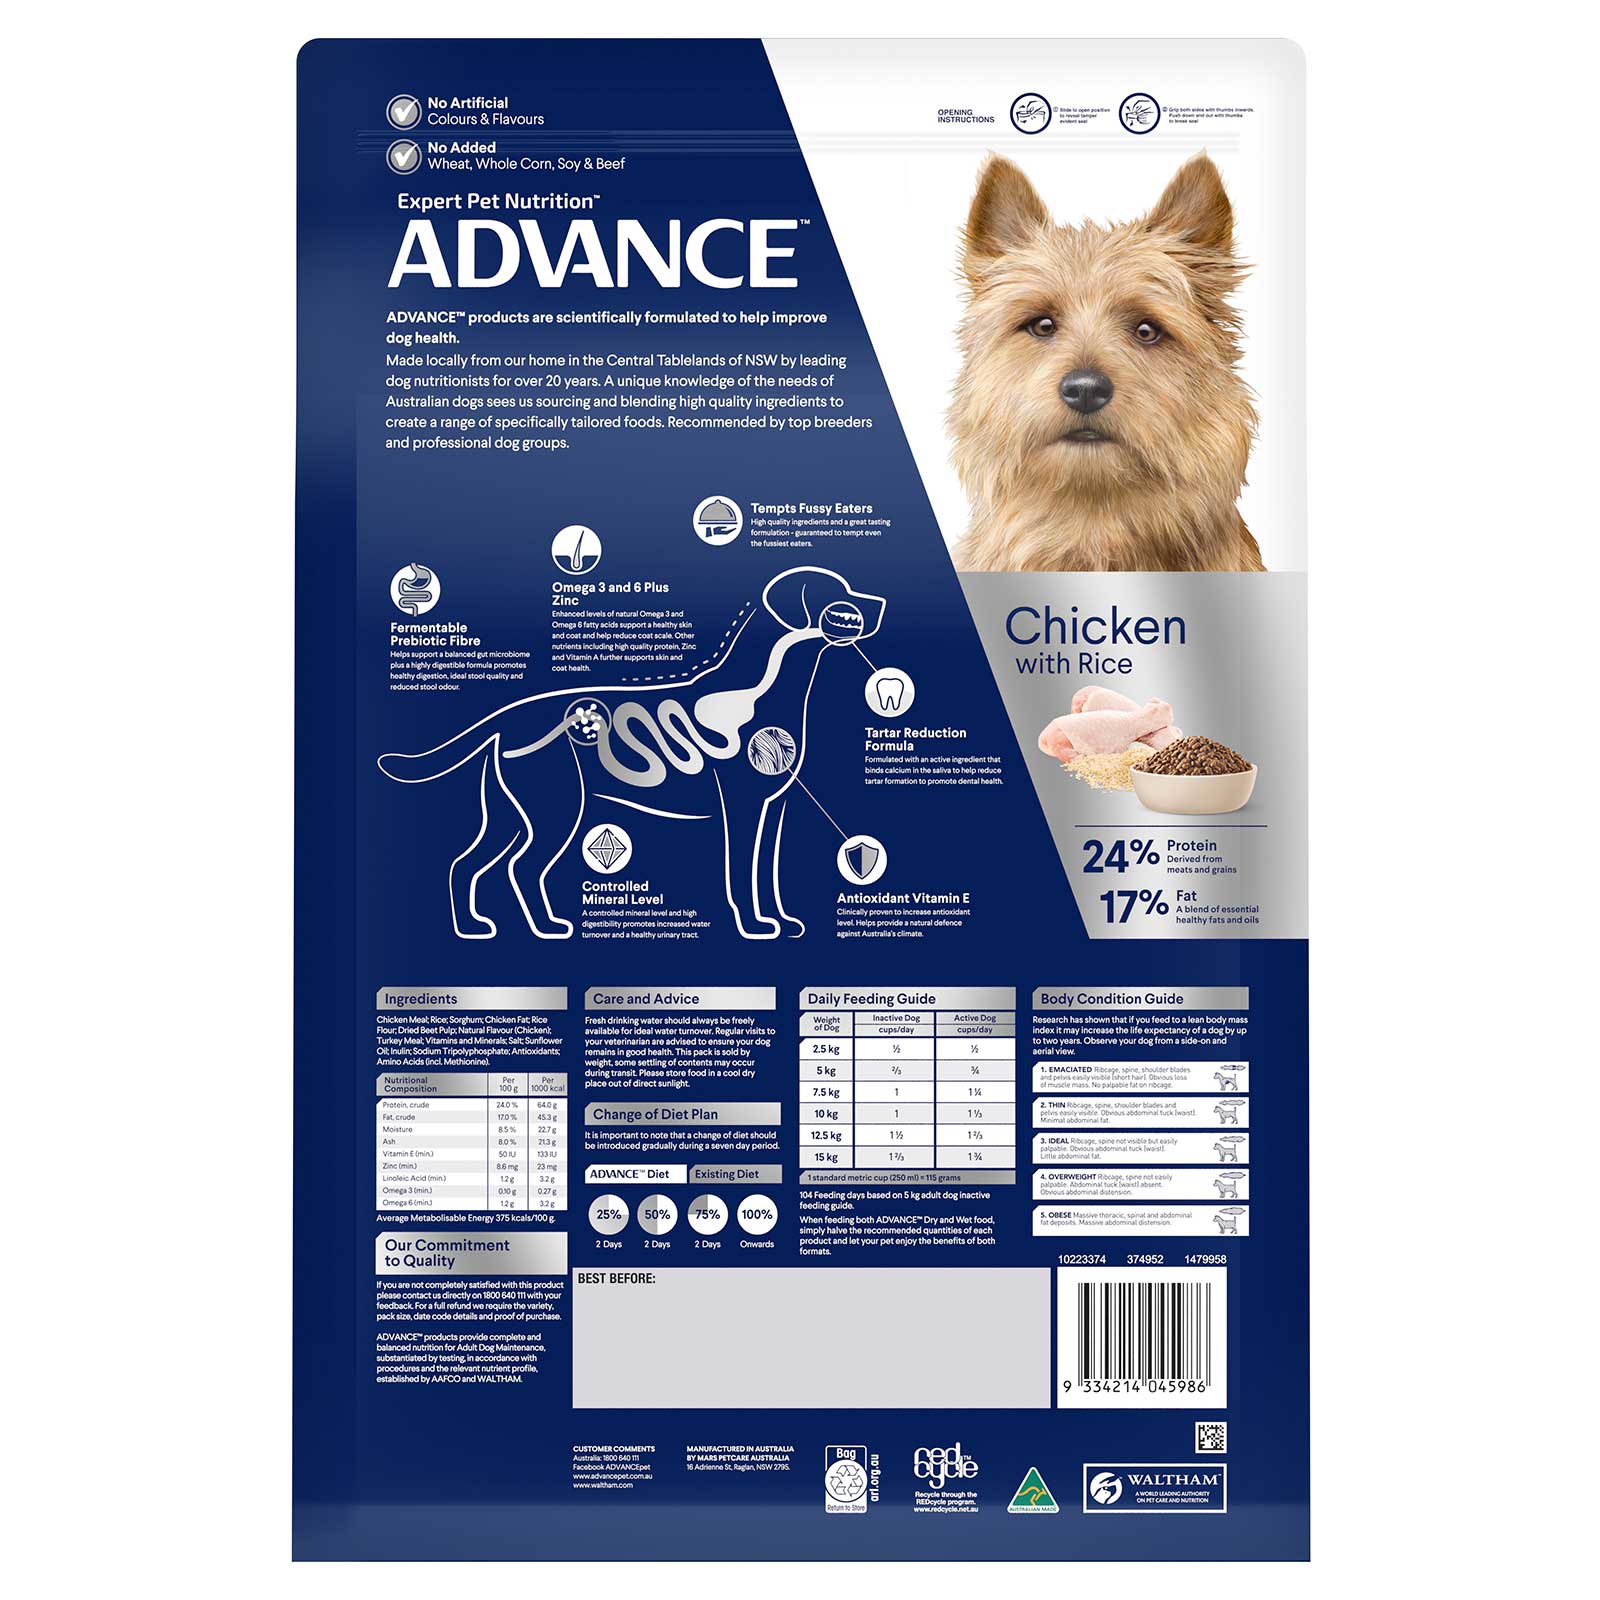 Advance Dog Food Adult Small Breed Chicken with Rice